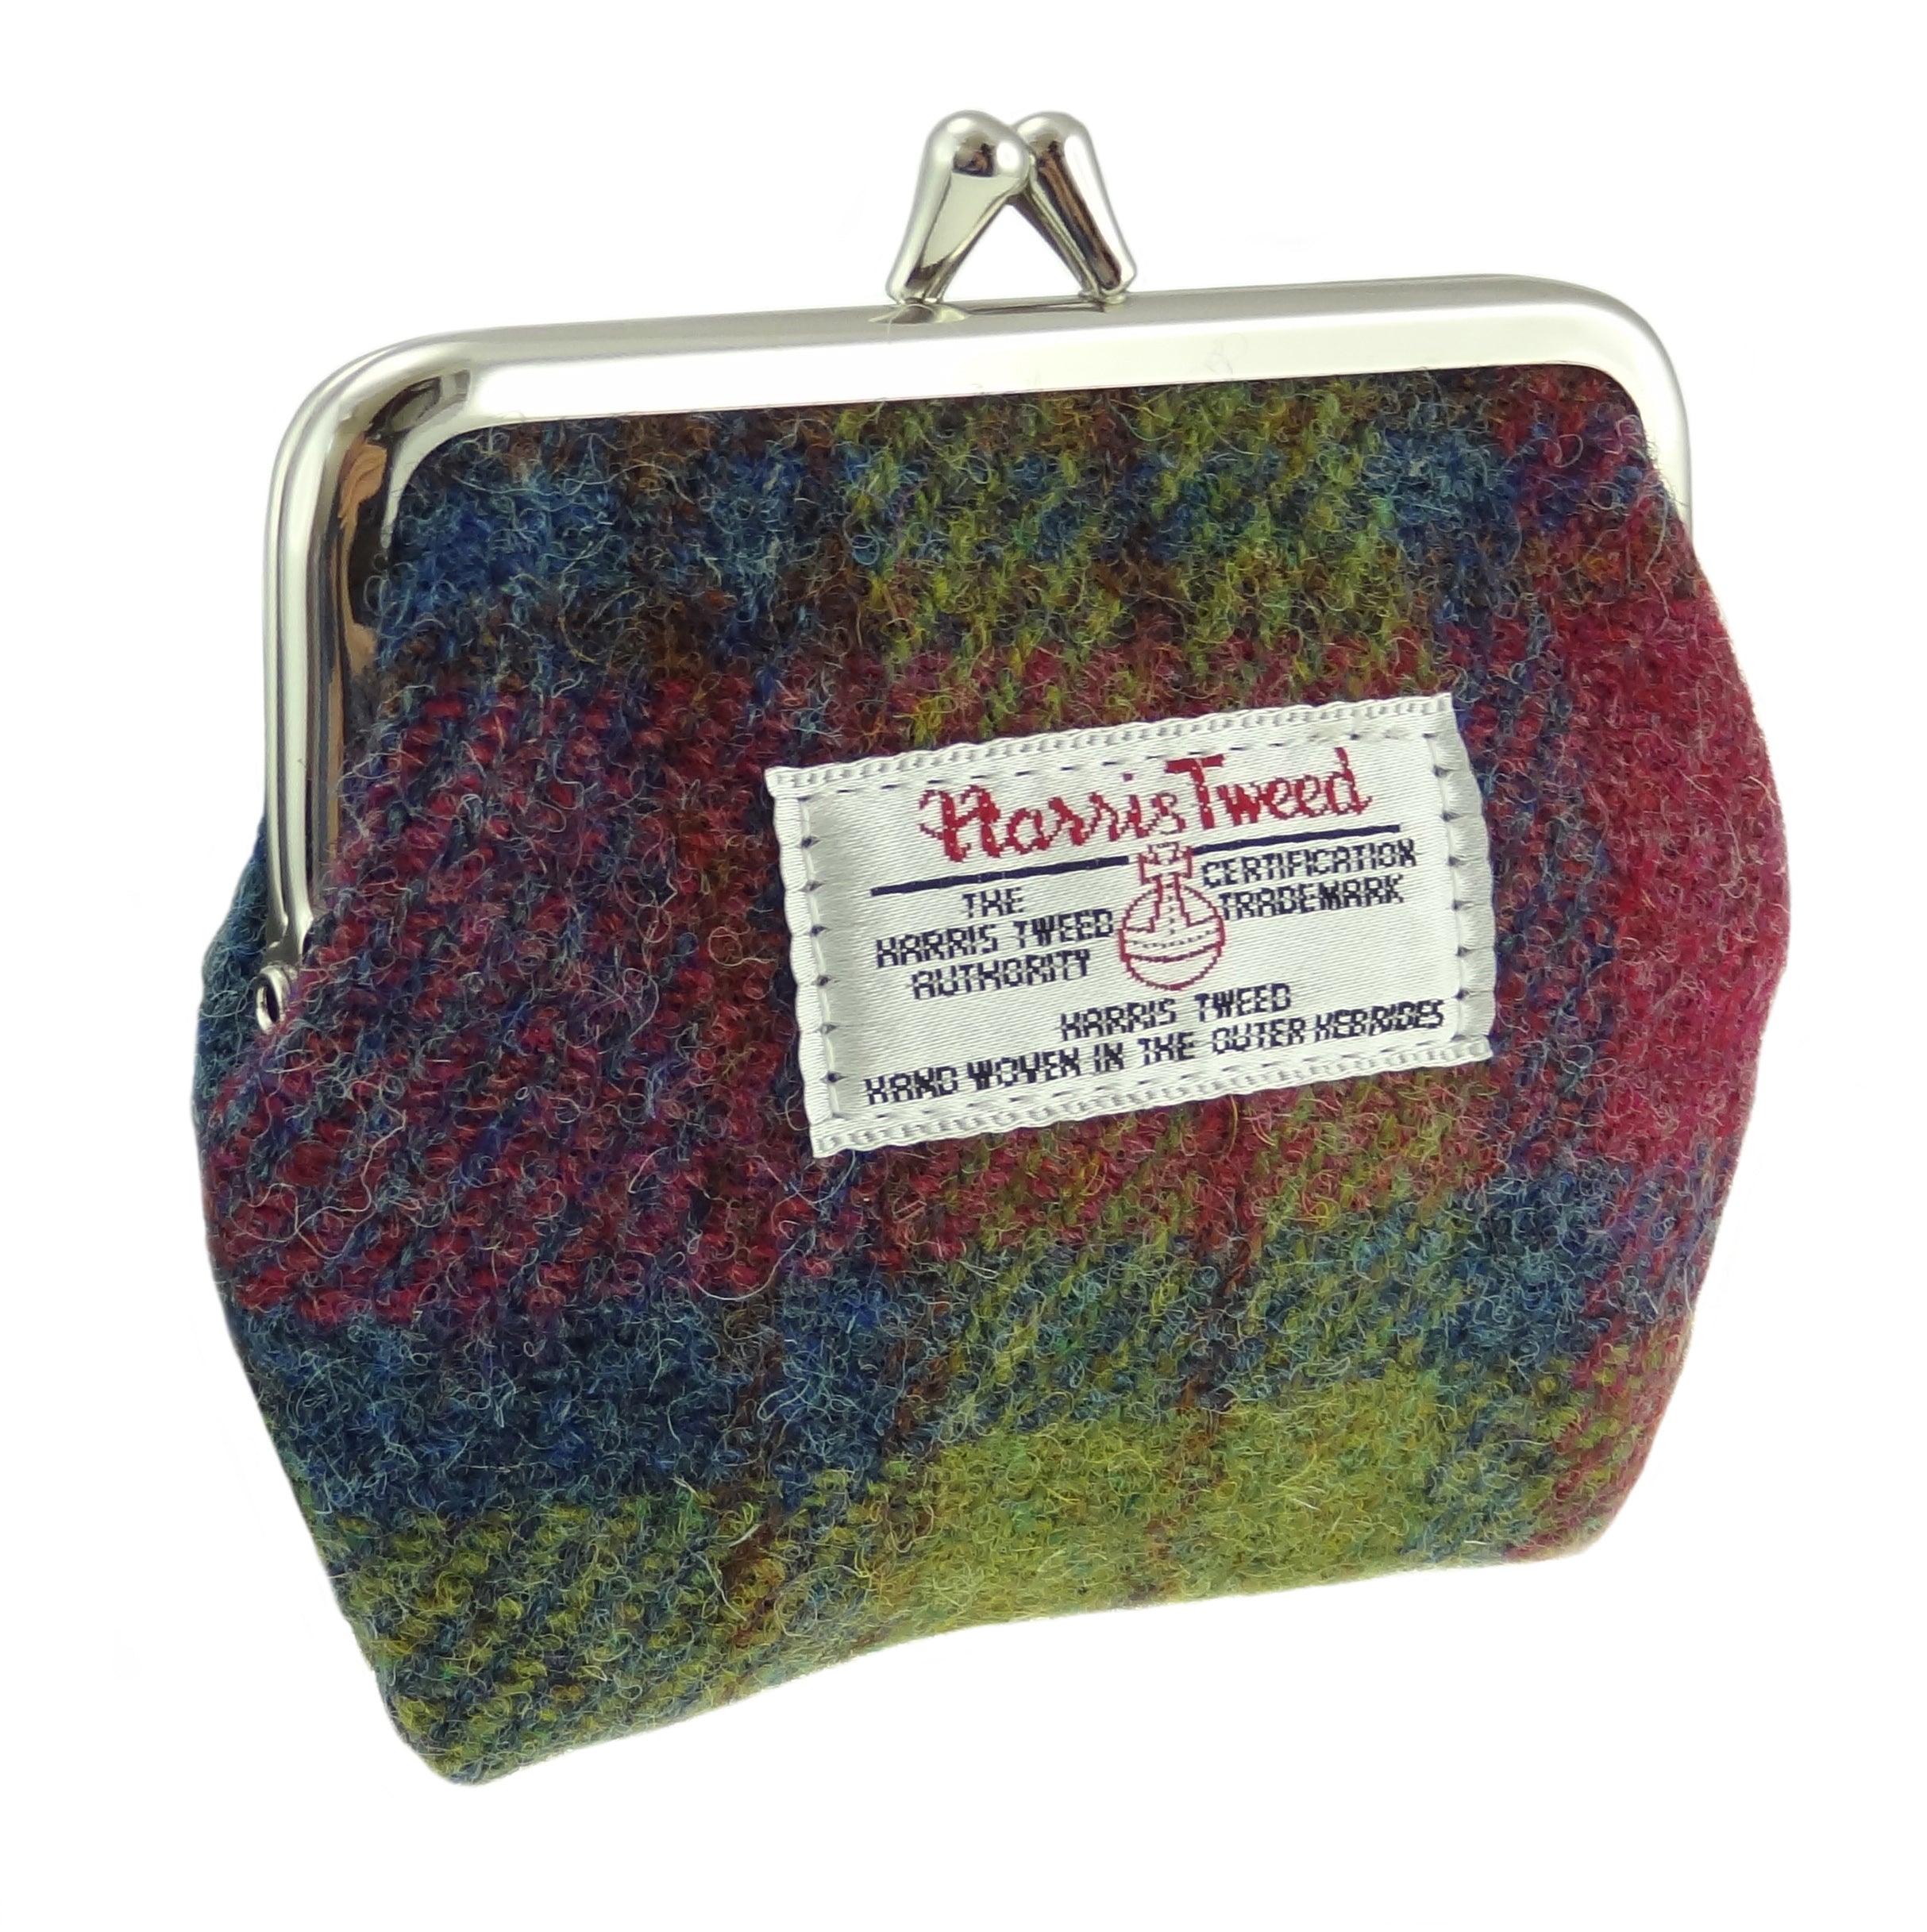 Coin Purse - Clasp (Harris Tweed) – Scottish Country Shop